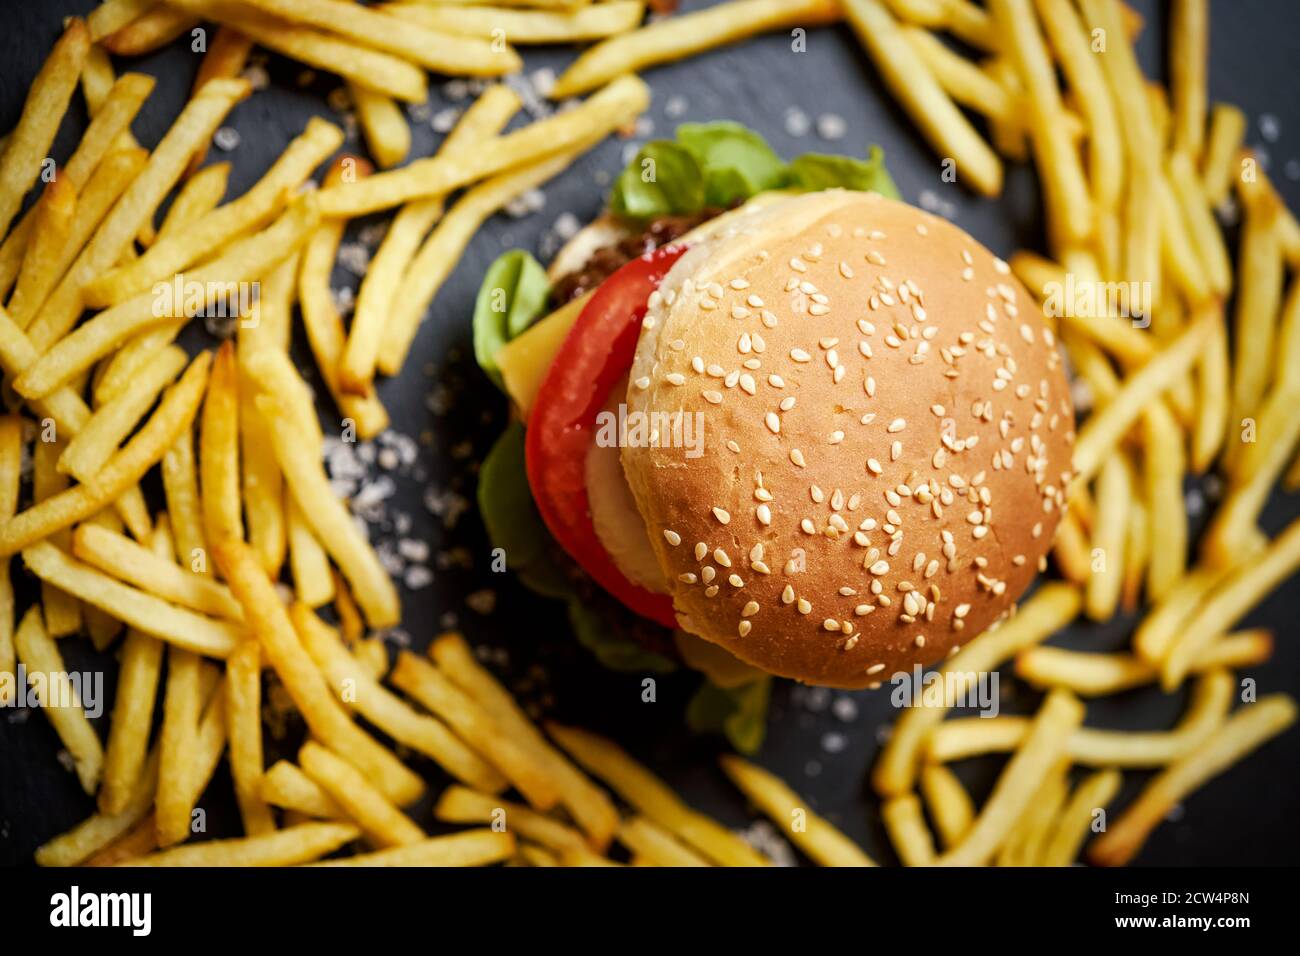 cheeseburger surrounded by french fries on a black table Stock Photo